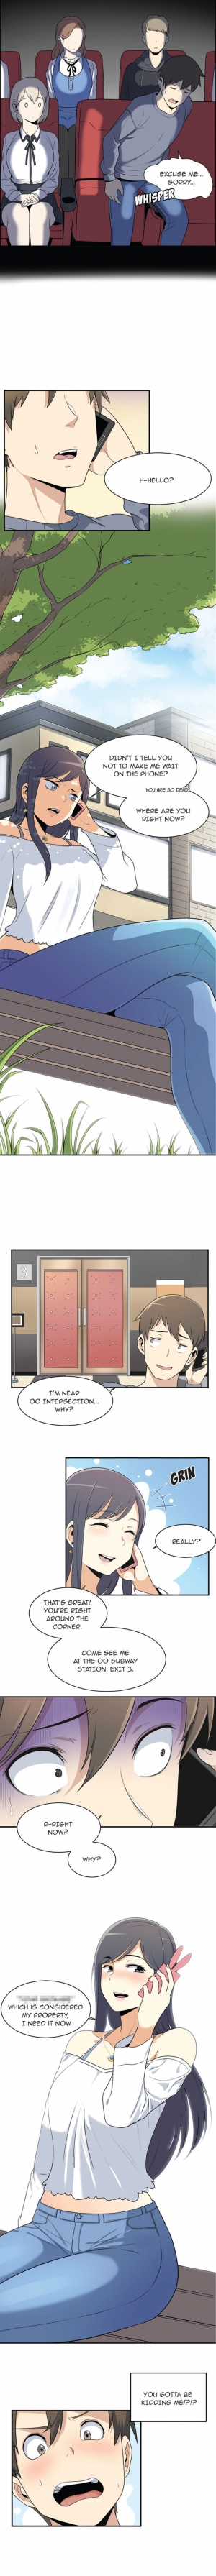 [Kook] Excuse me, This is my Room Ch. 1-26 [English] [Ongoing] - Page 4